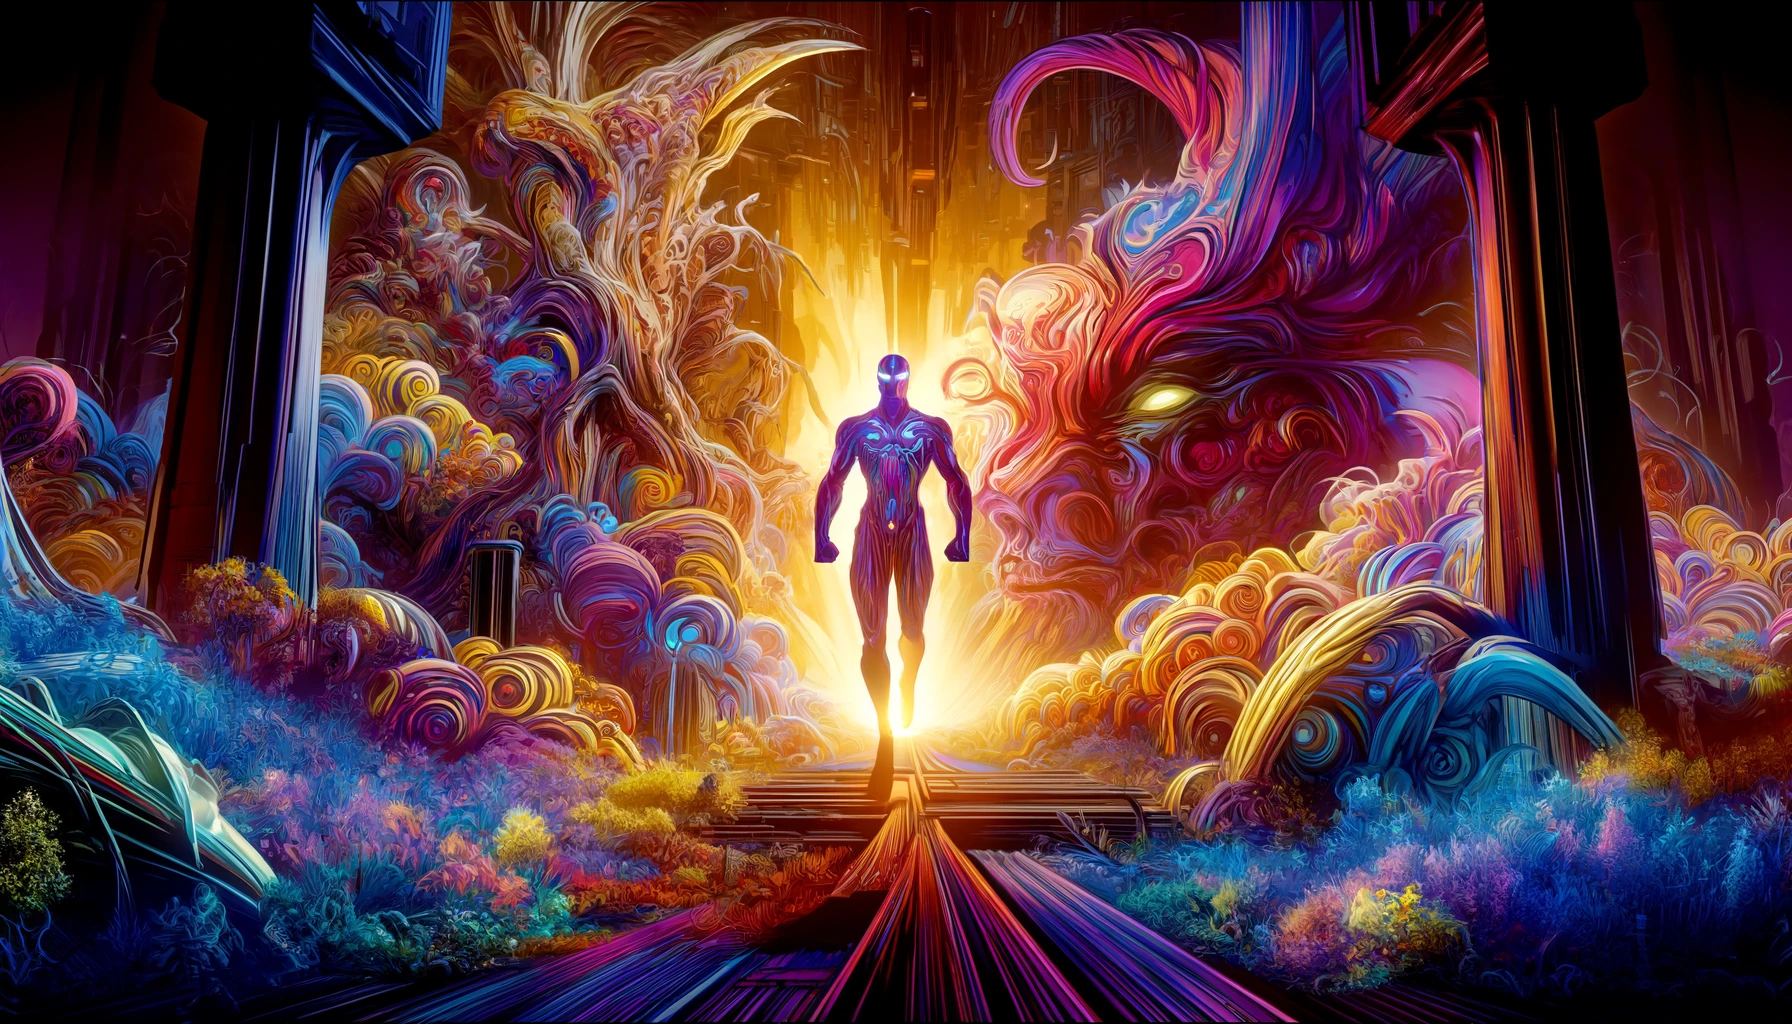 A dynamic and colorful illustration of Gilgamesh standing in a vibrant, fantastical setting with strange and astonishing forms. The scene evokes a sense of awe and grandeur, perfect for a magnificent sci-fi movie.